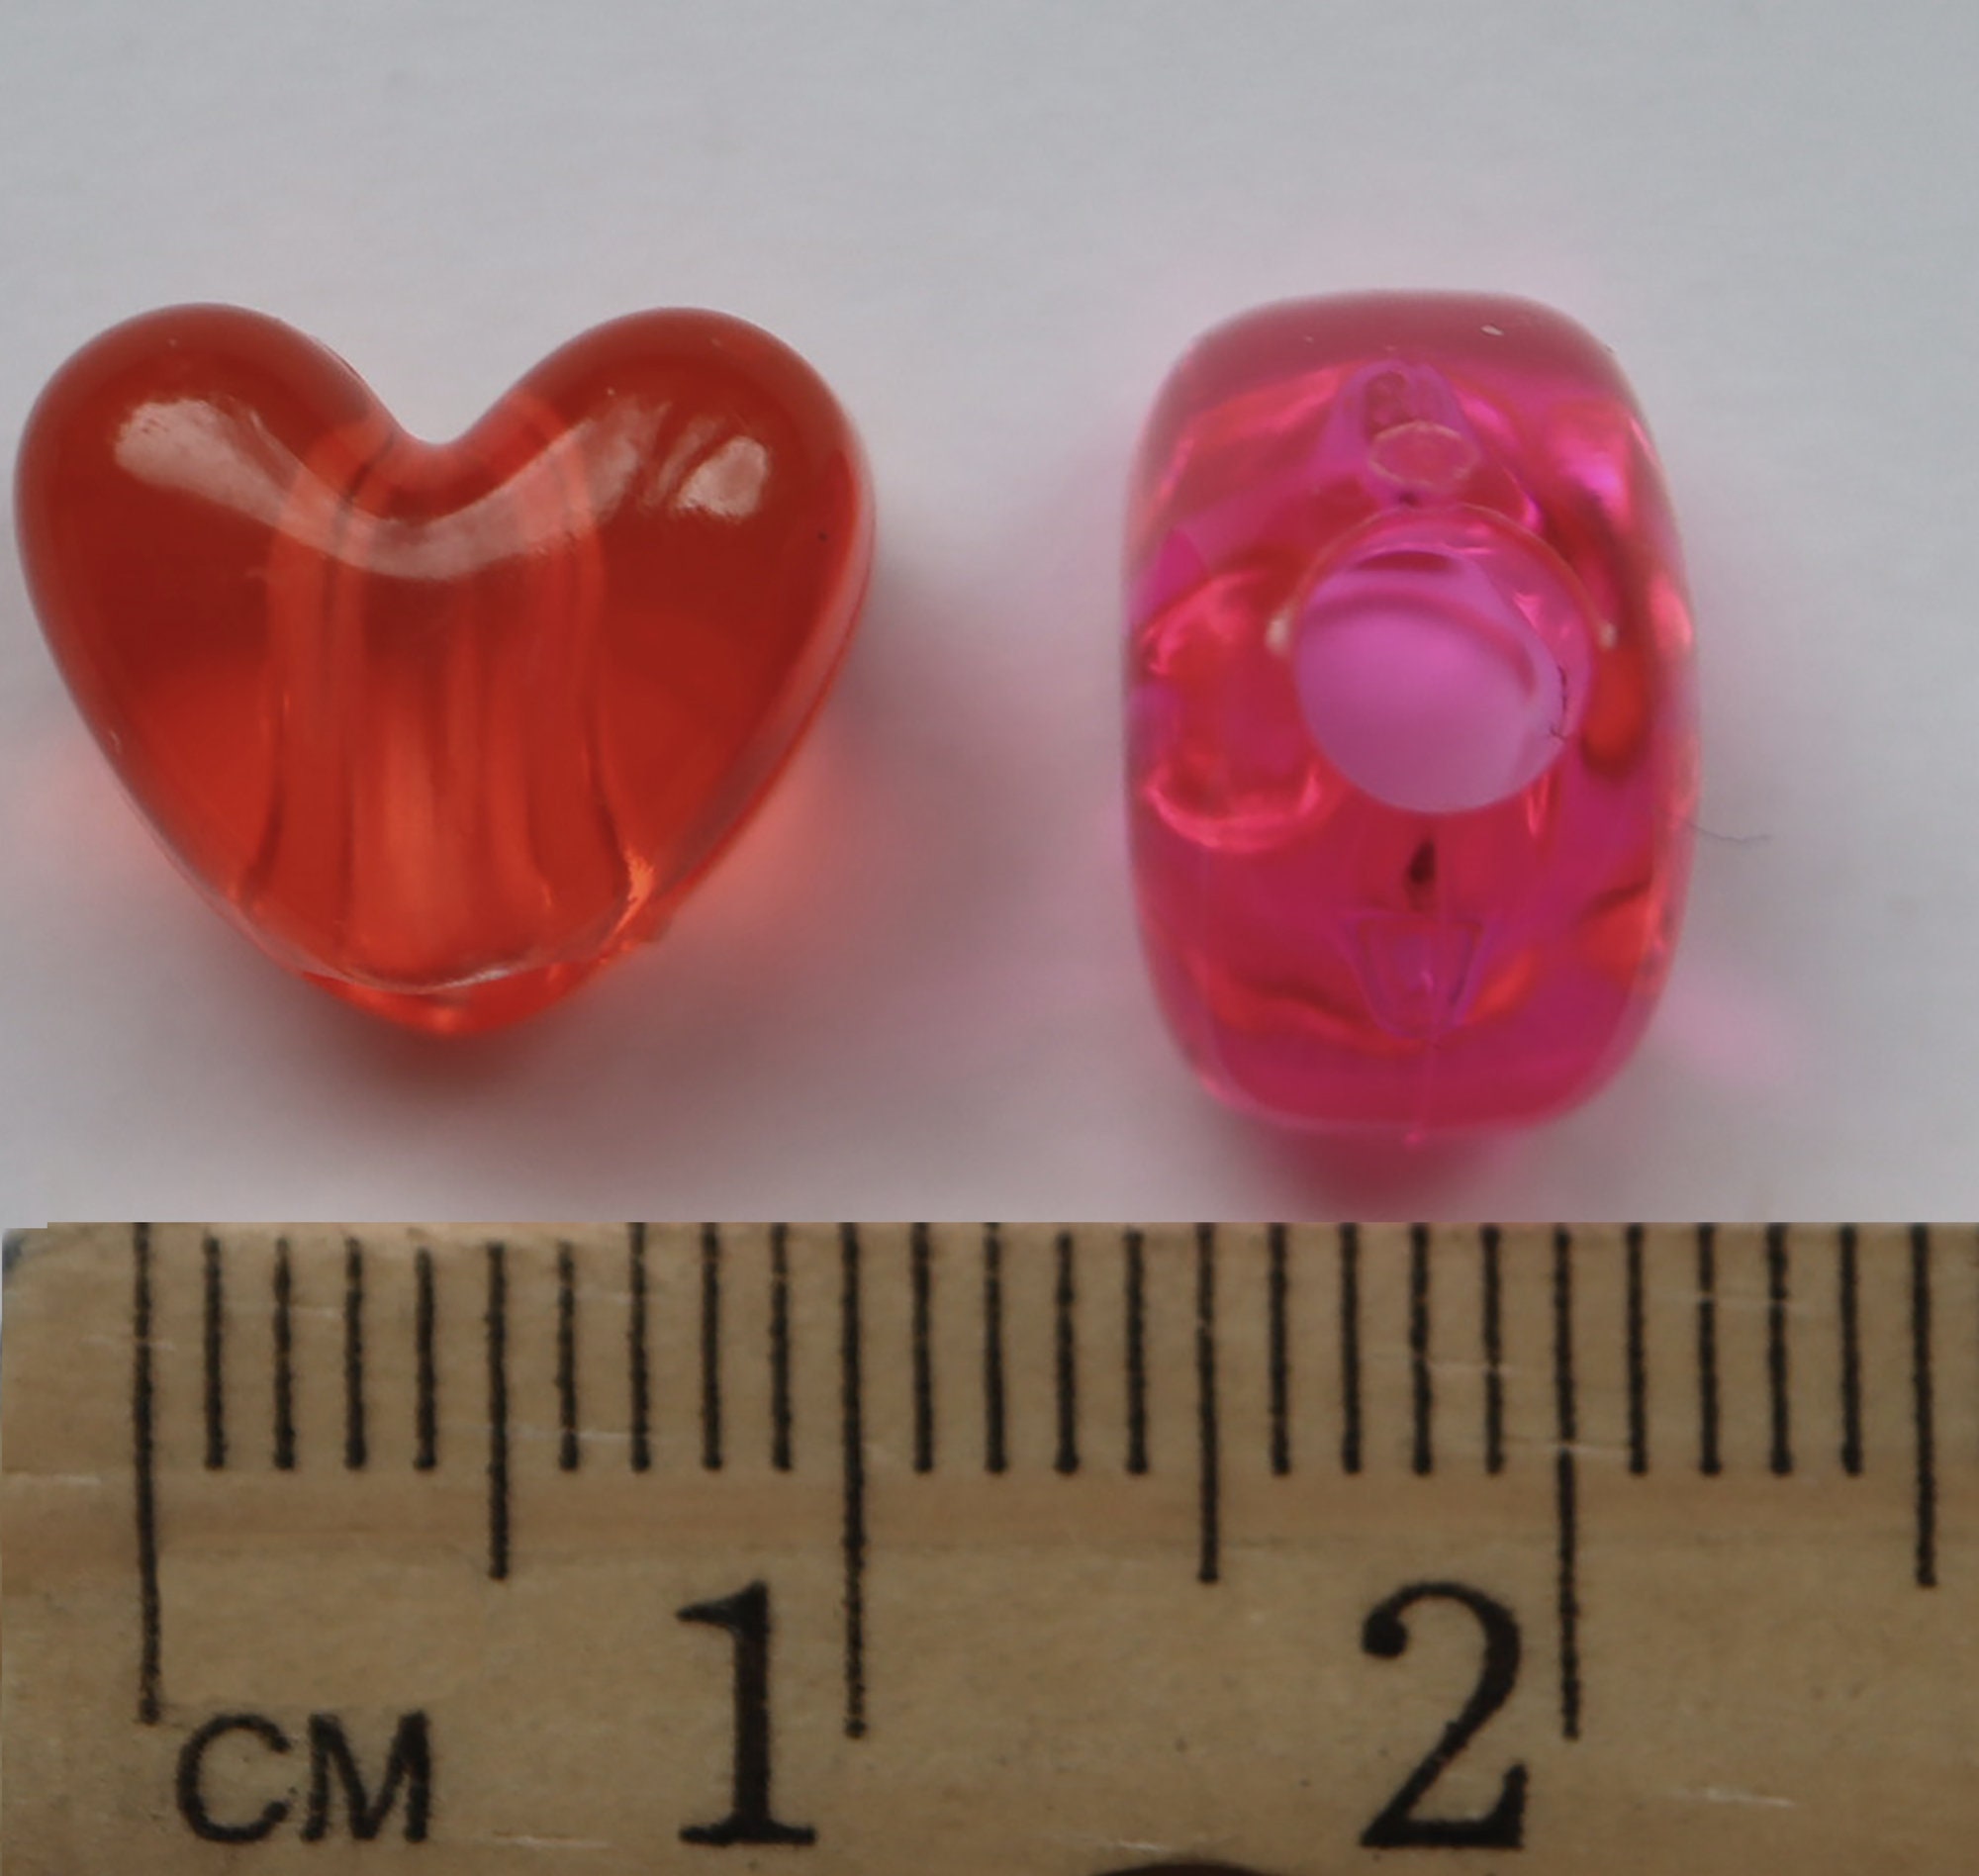 Large Transparent Red Heart Pony Beads